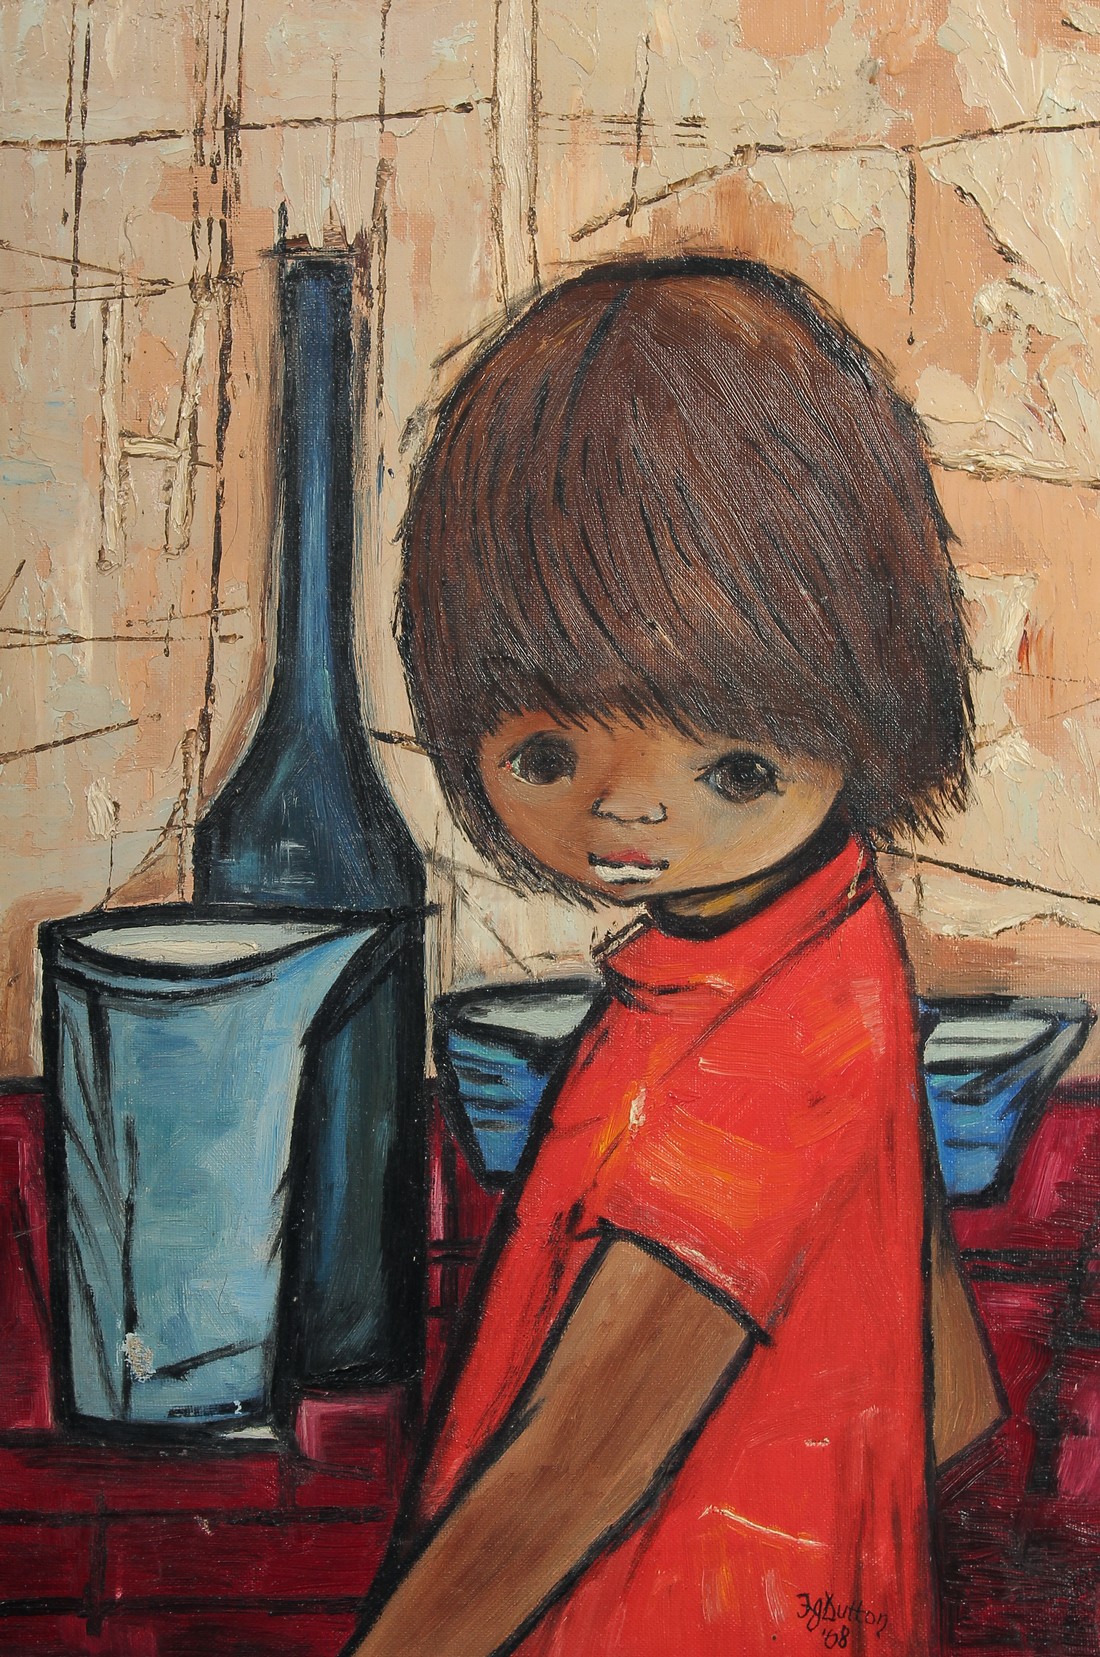 J G Dutton, circa 1968, a study of a young child, oil on canvas signed and dated, 17" x 11.5" (43